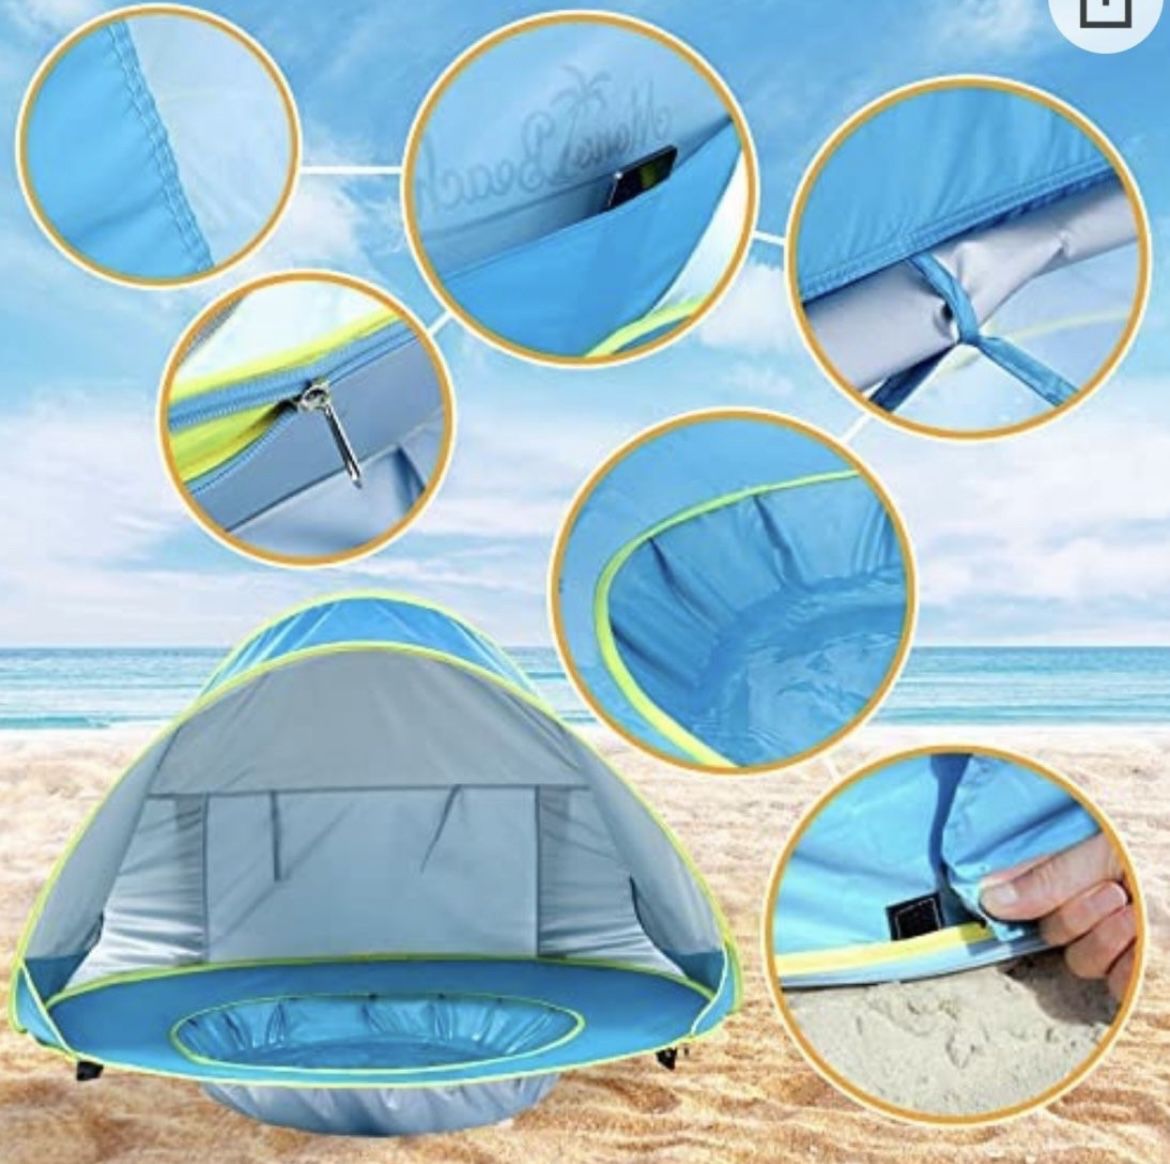 Brand New Baby beach Portable pop-up tent/shade..Marked firm.../pool/UV Protection 